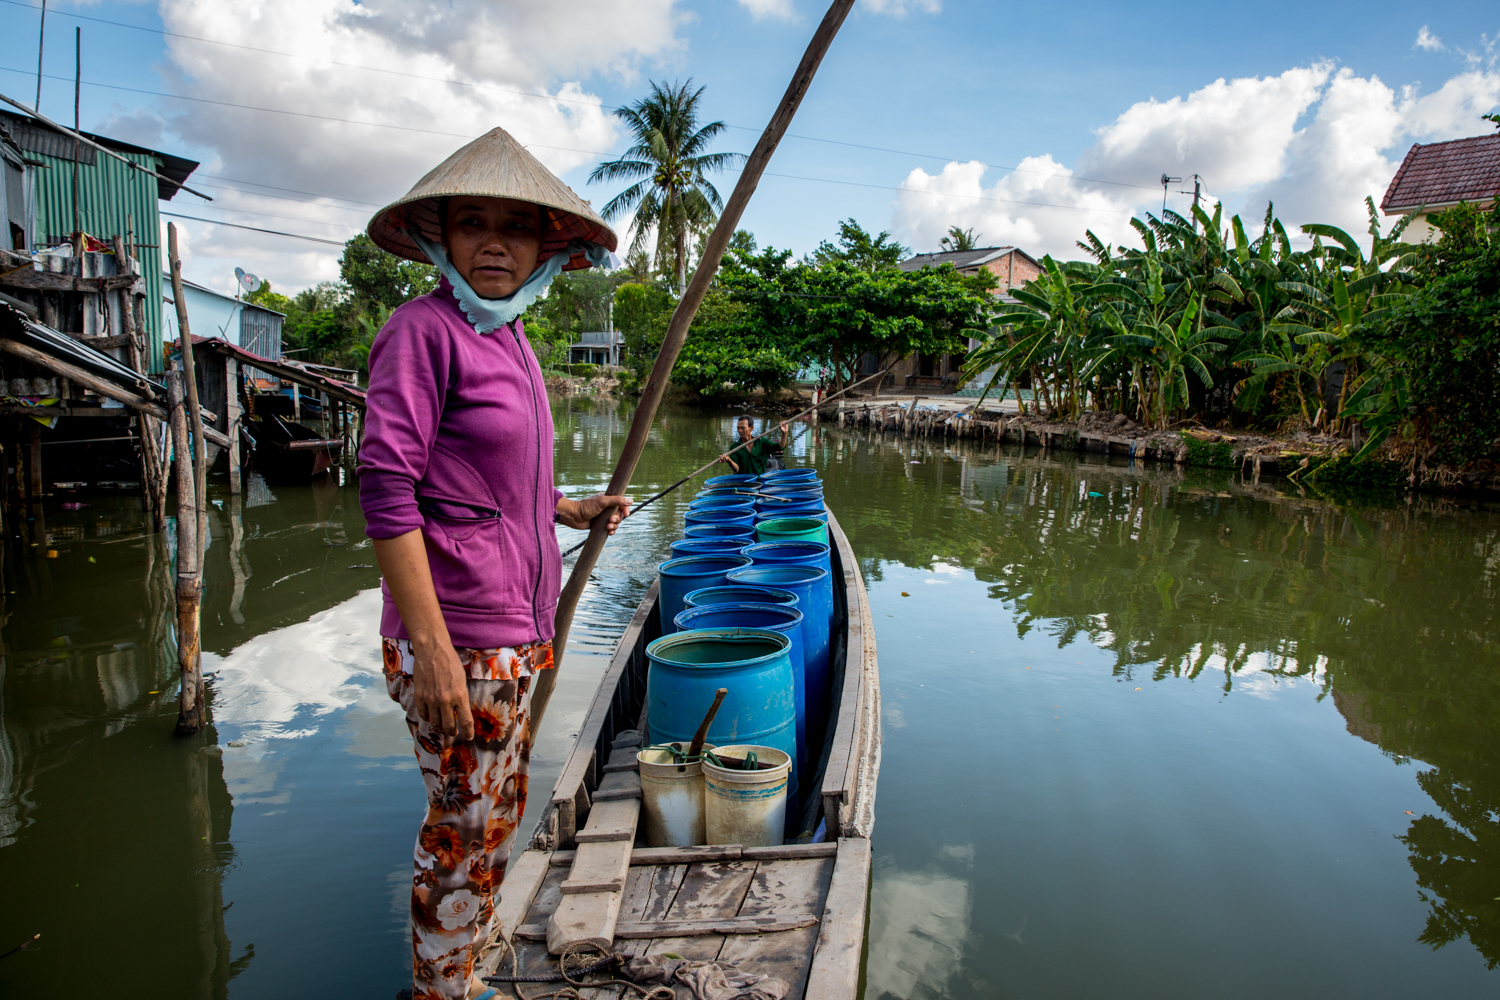  Woman on boat full of barrels of water to be sold to drought ravaged farmers in Soc Trang, Mekong Delta, Vietnam. 